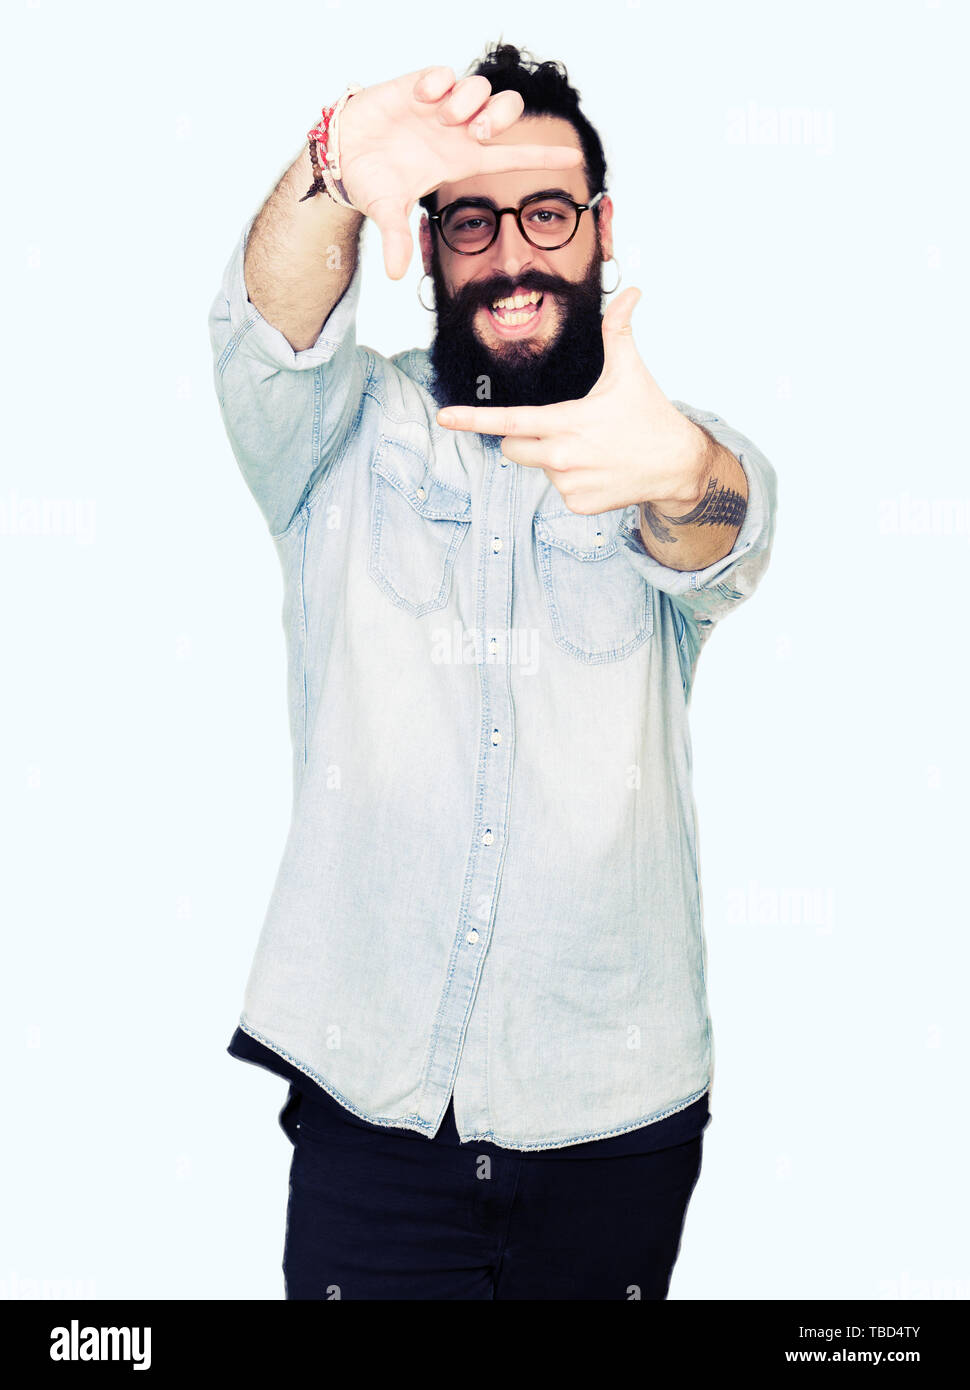 Young Hipster Man With Long Hair And Beard Wearing Glasses Smiling